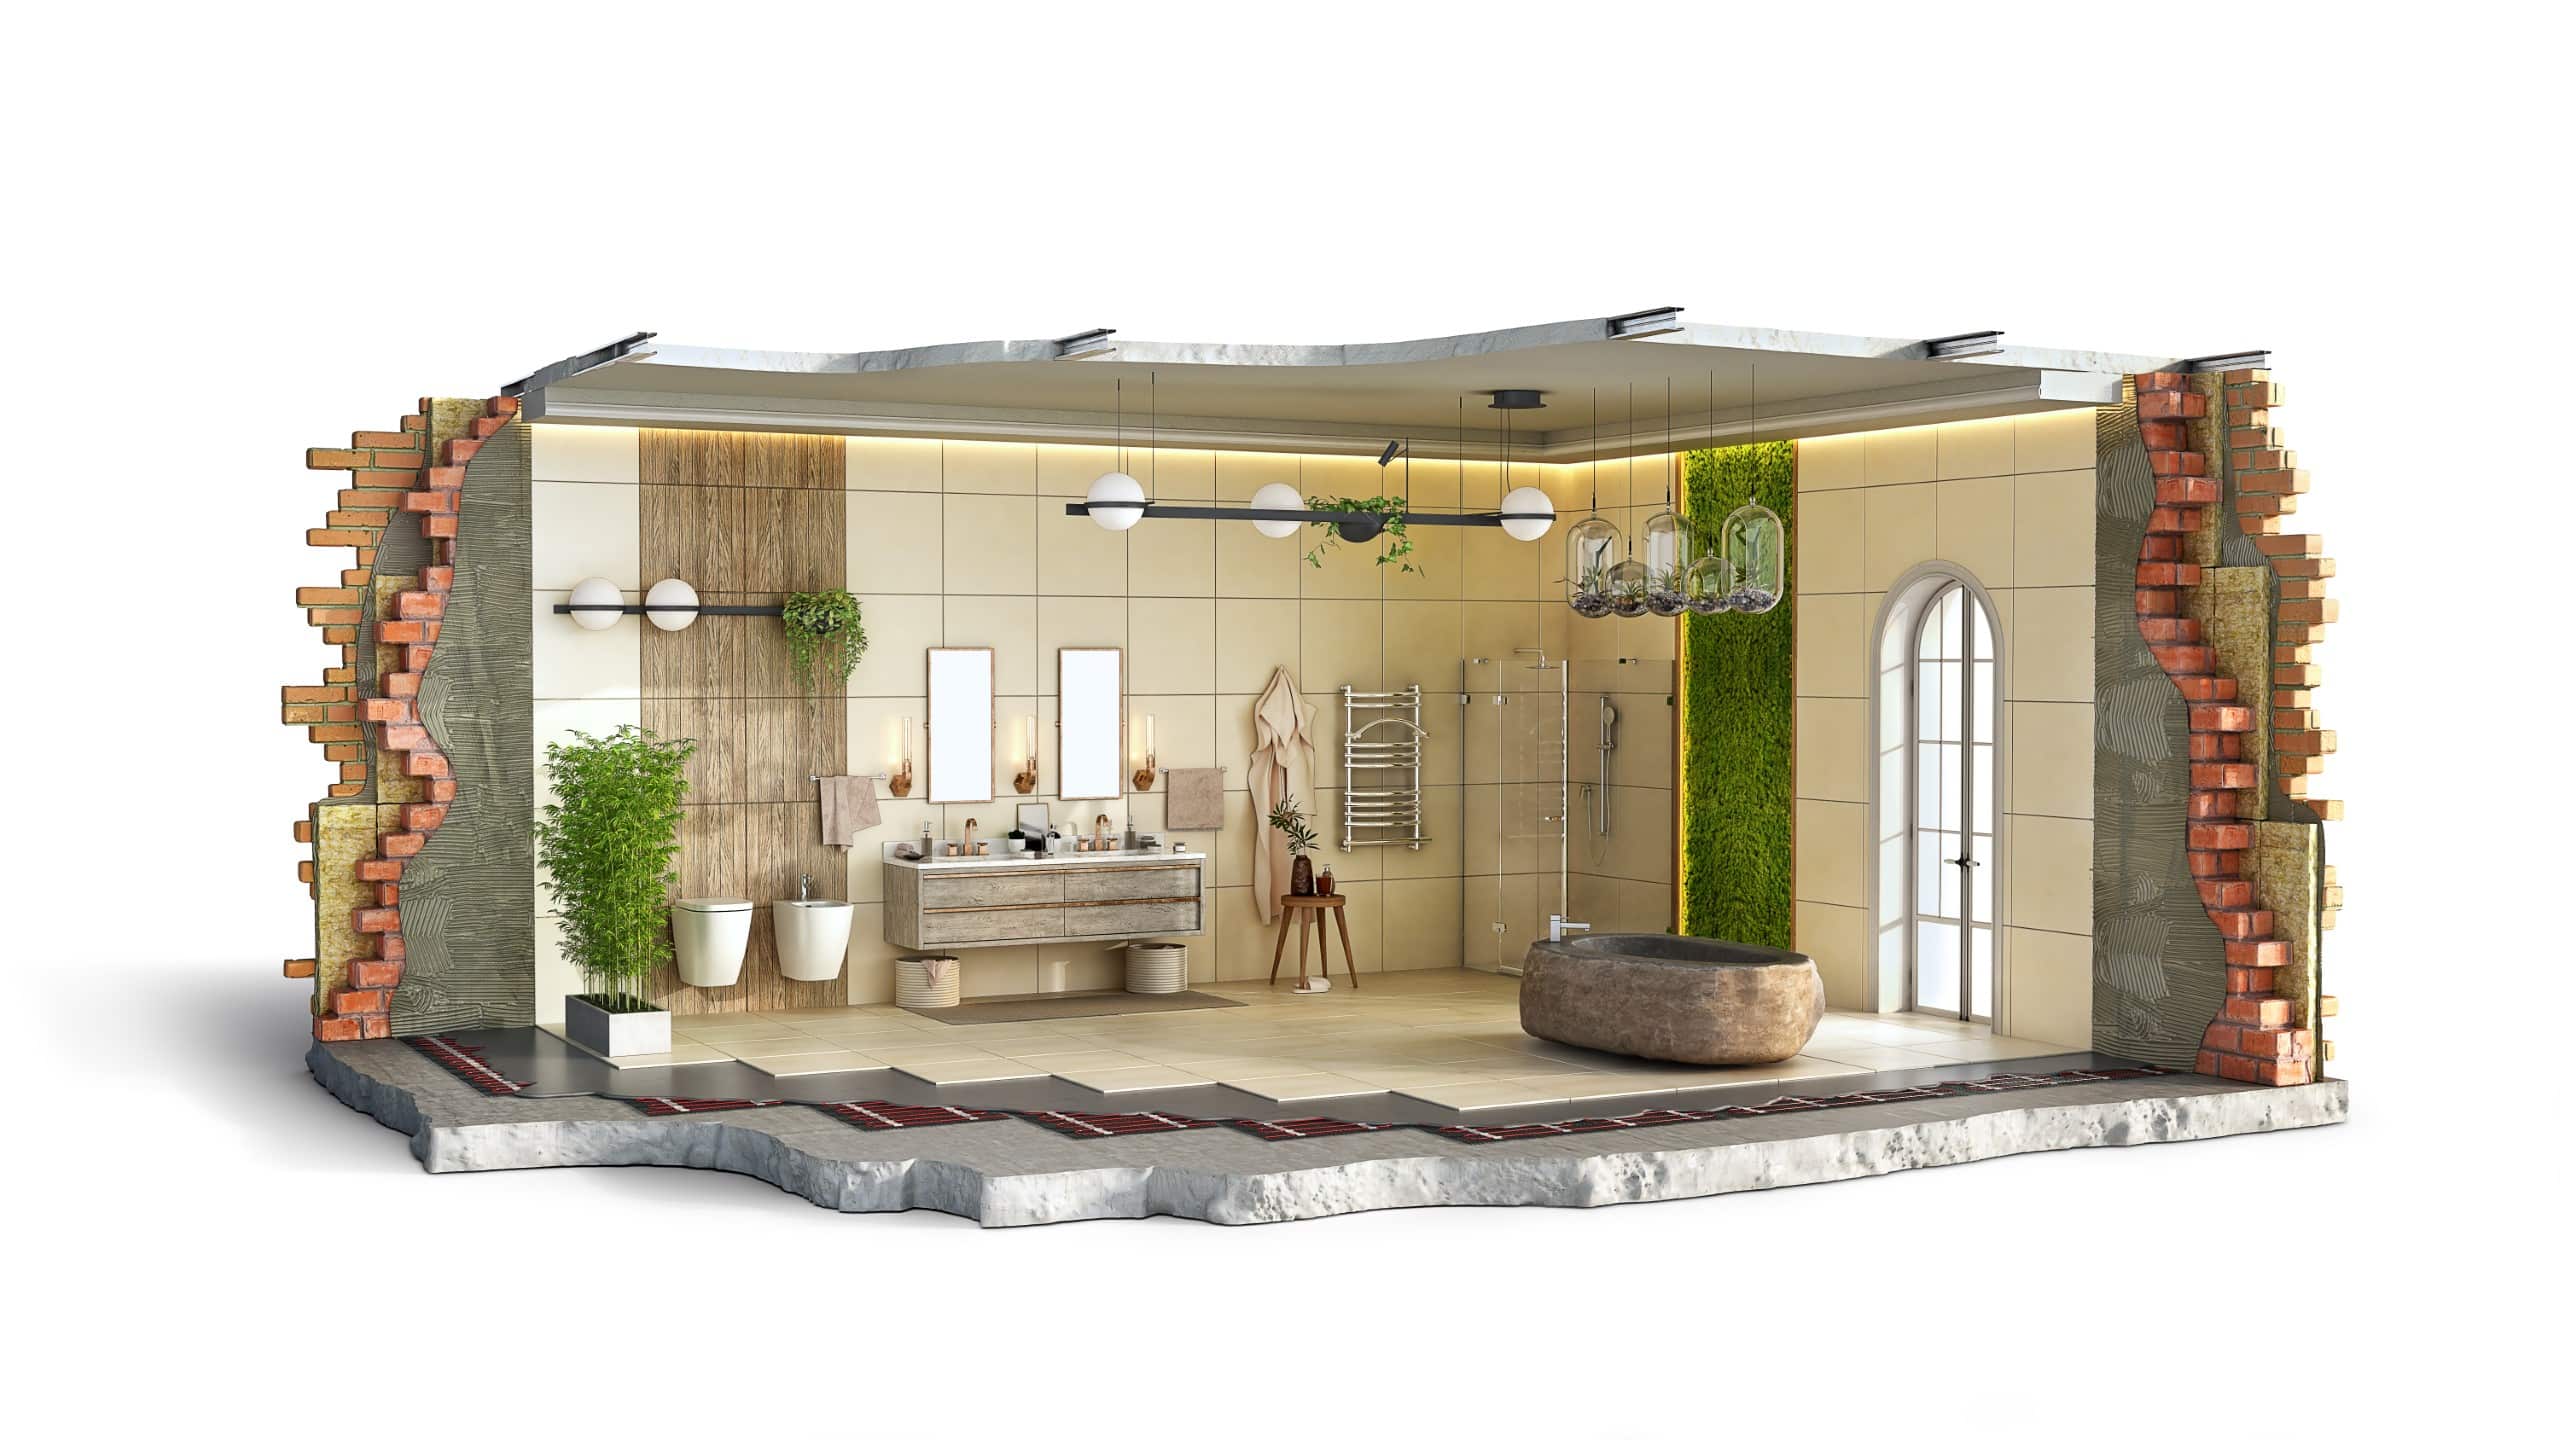 Part of bathroom ripped out of interior, 3d illustration